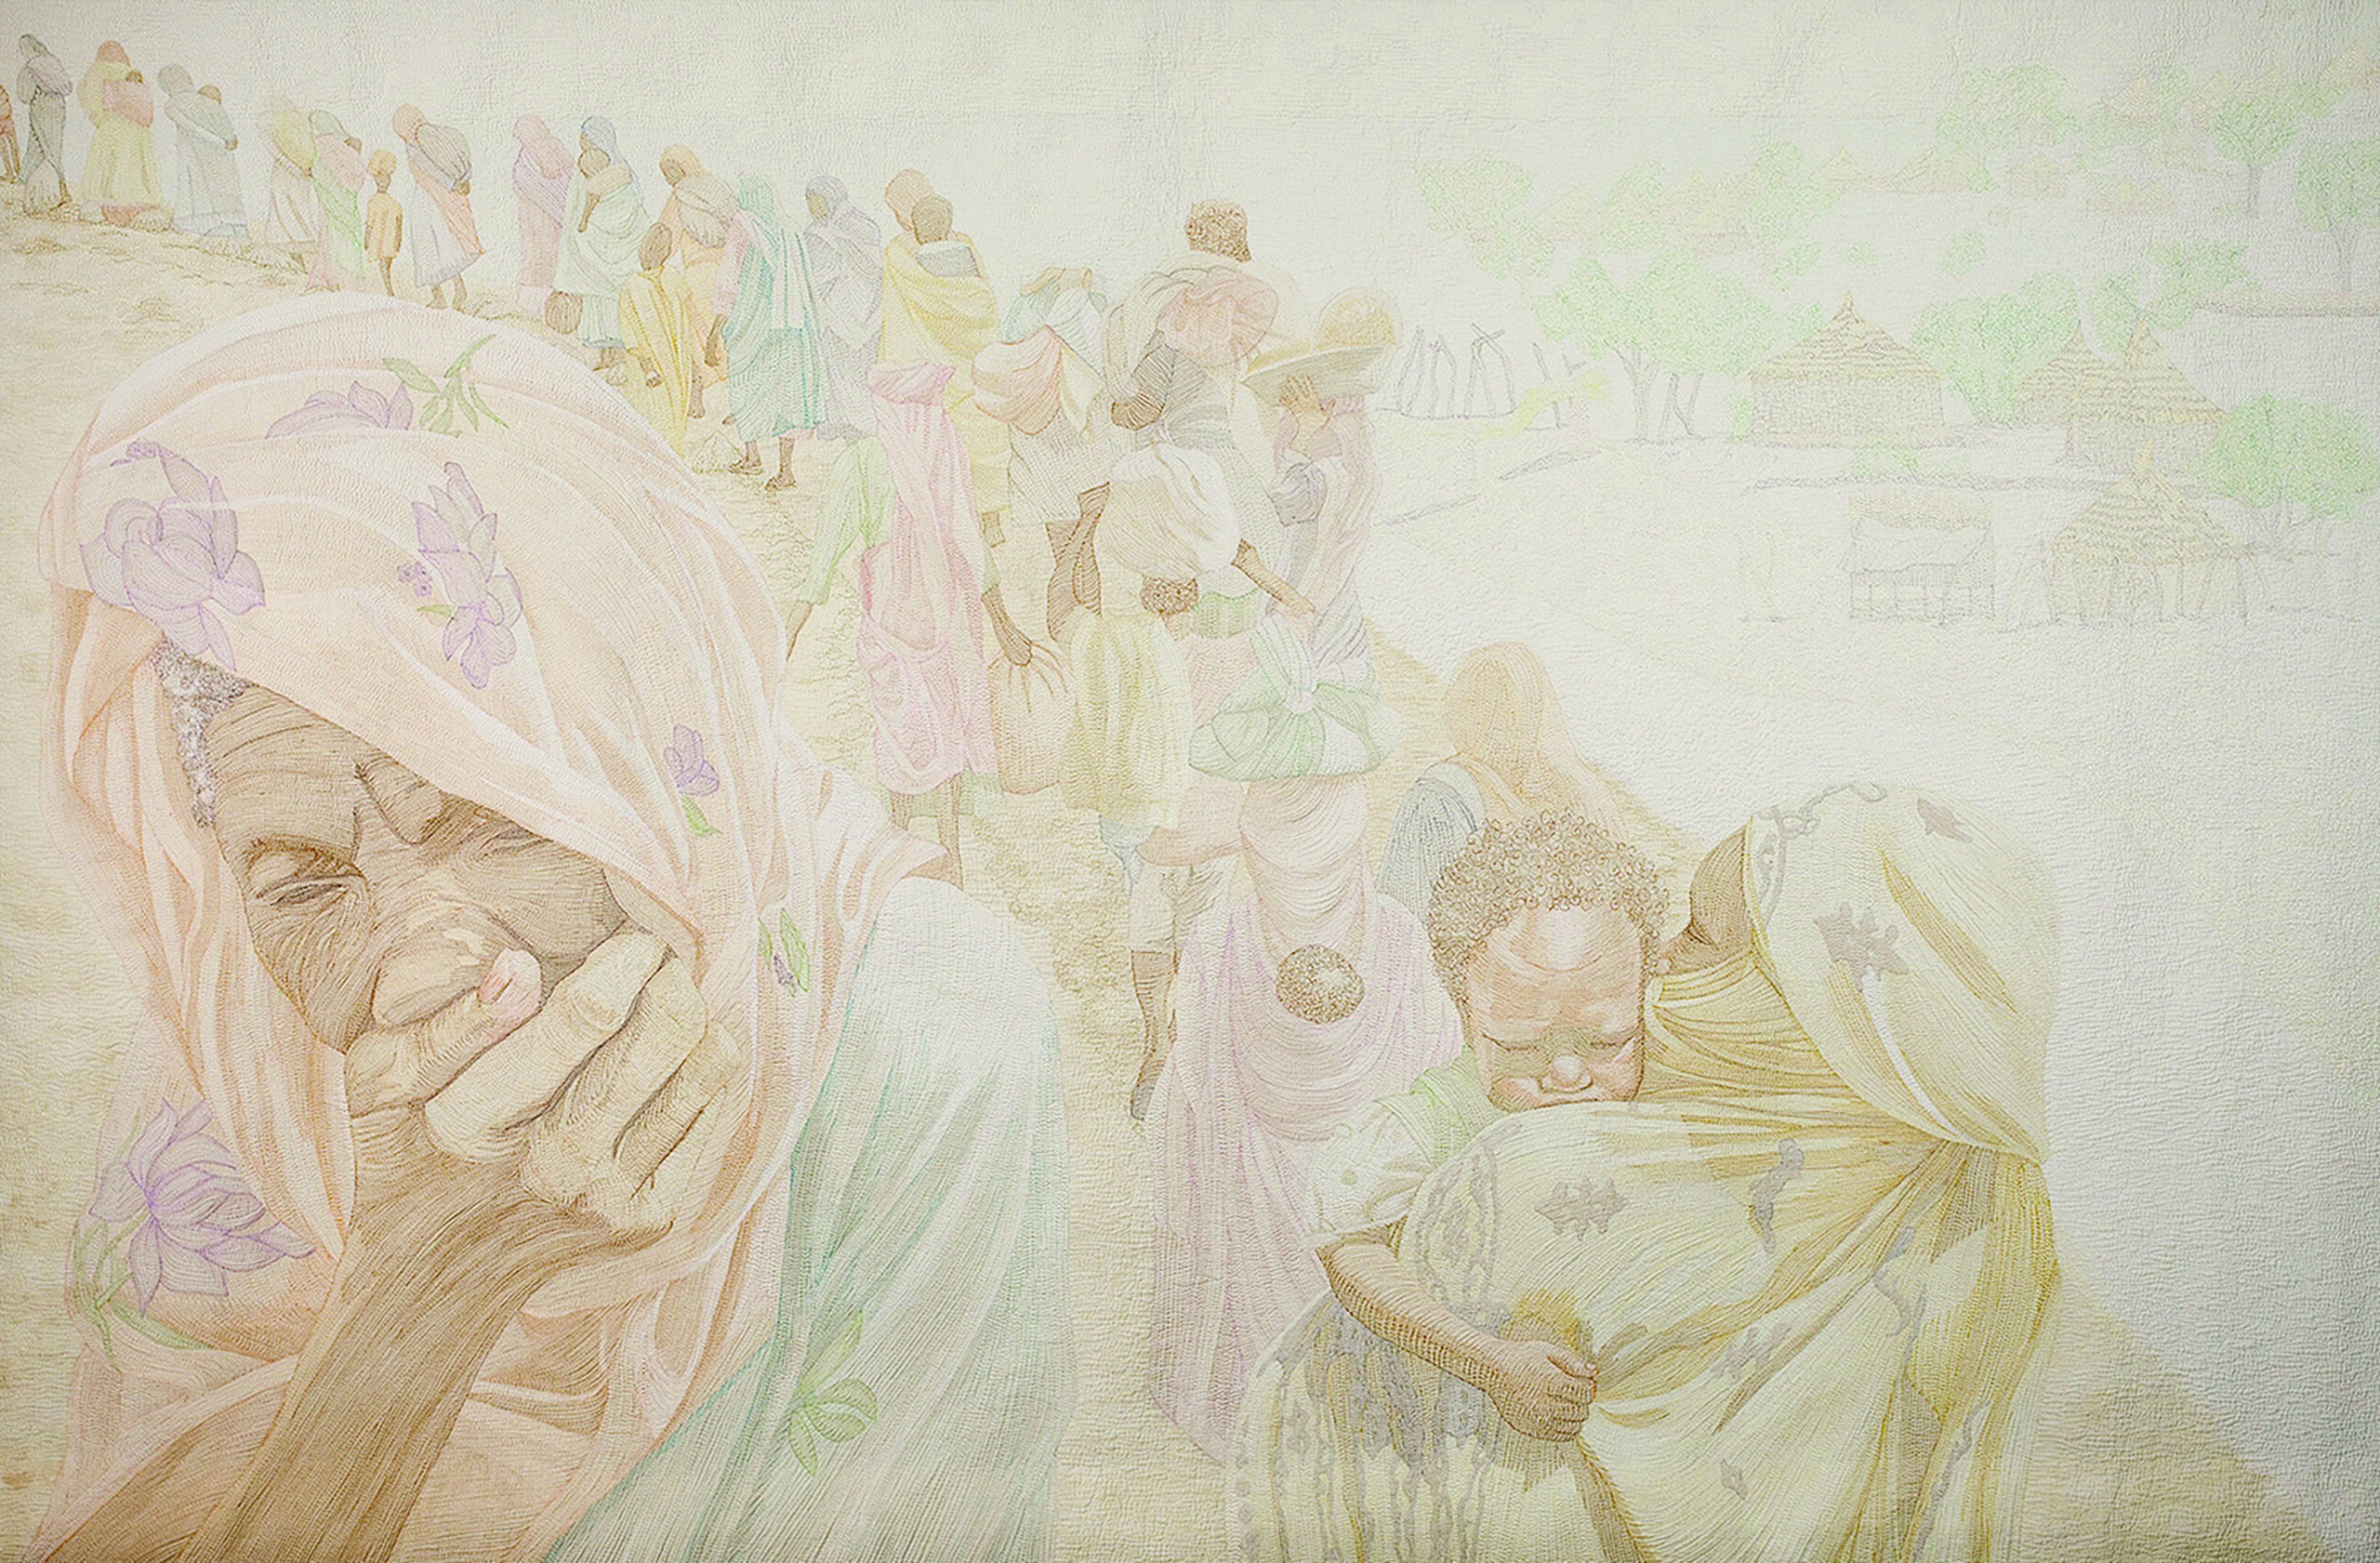 A quilted artwork in warm, muted colors depicting a long line of Black adults and children dressed in colorful clothes fleeing their homes. In the foreground, an older woman covers her mouth and closes her eyes with emotion.